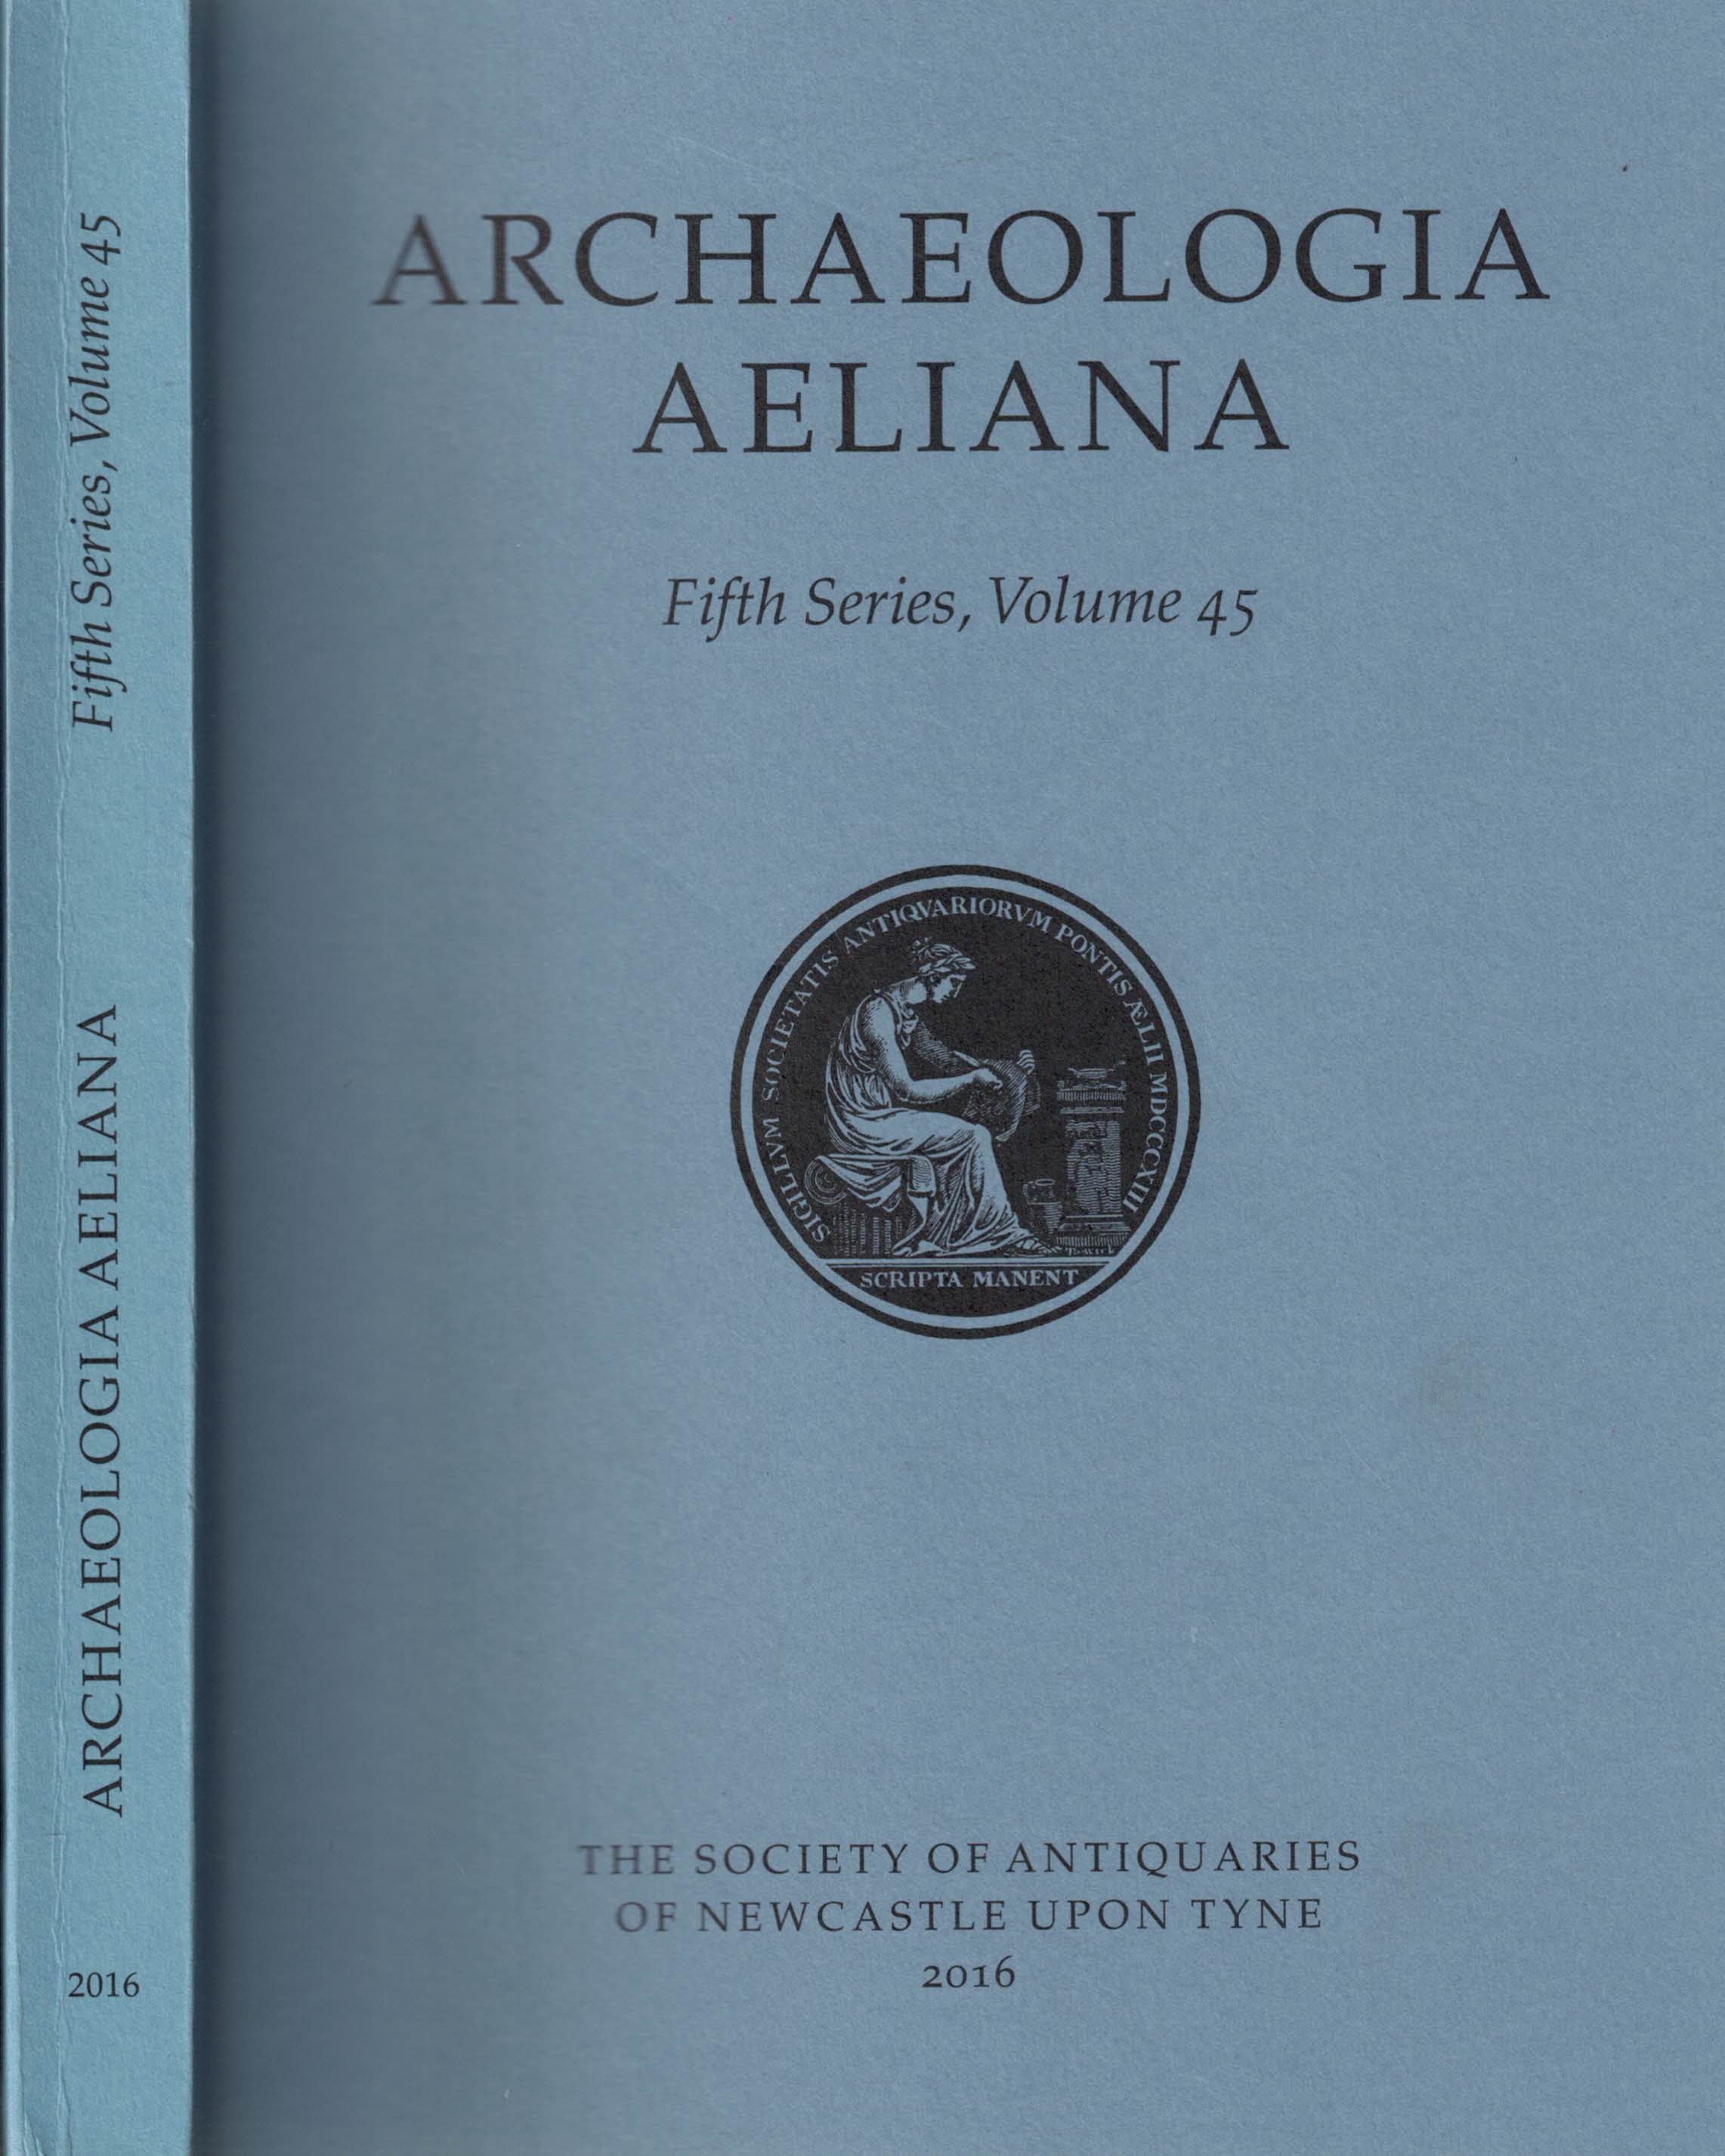 PROCTOR, JENNIFER; FERN, ROGER [EDS.] - Archaeologia Aeliana or Miscellaneous Tracts Relating to Antiquity. 5th Series. Volume 45. 2016